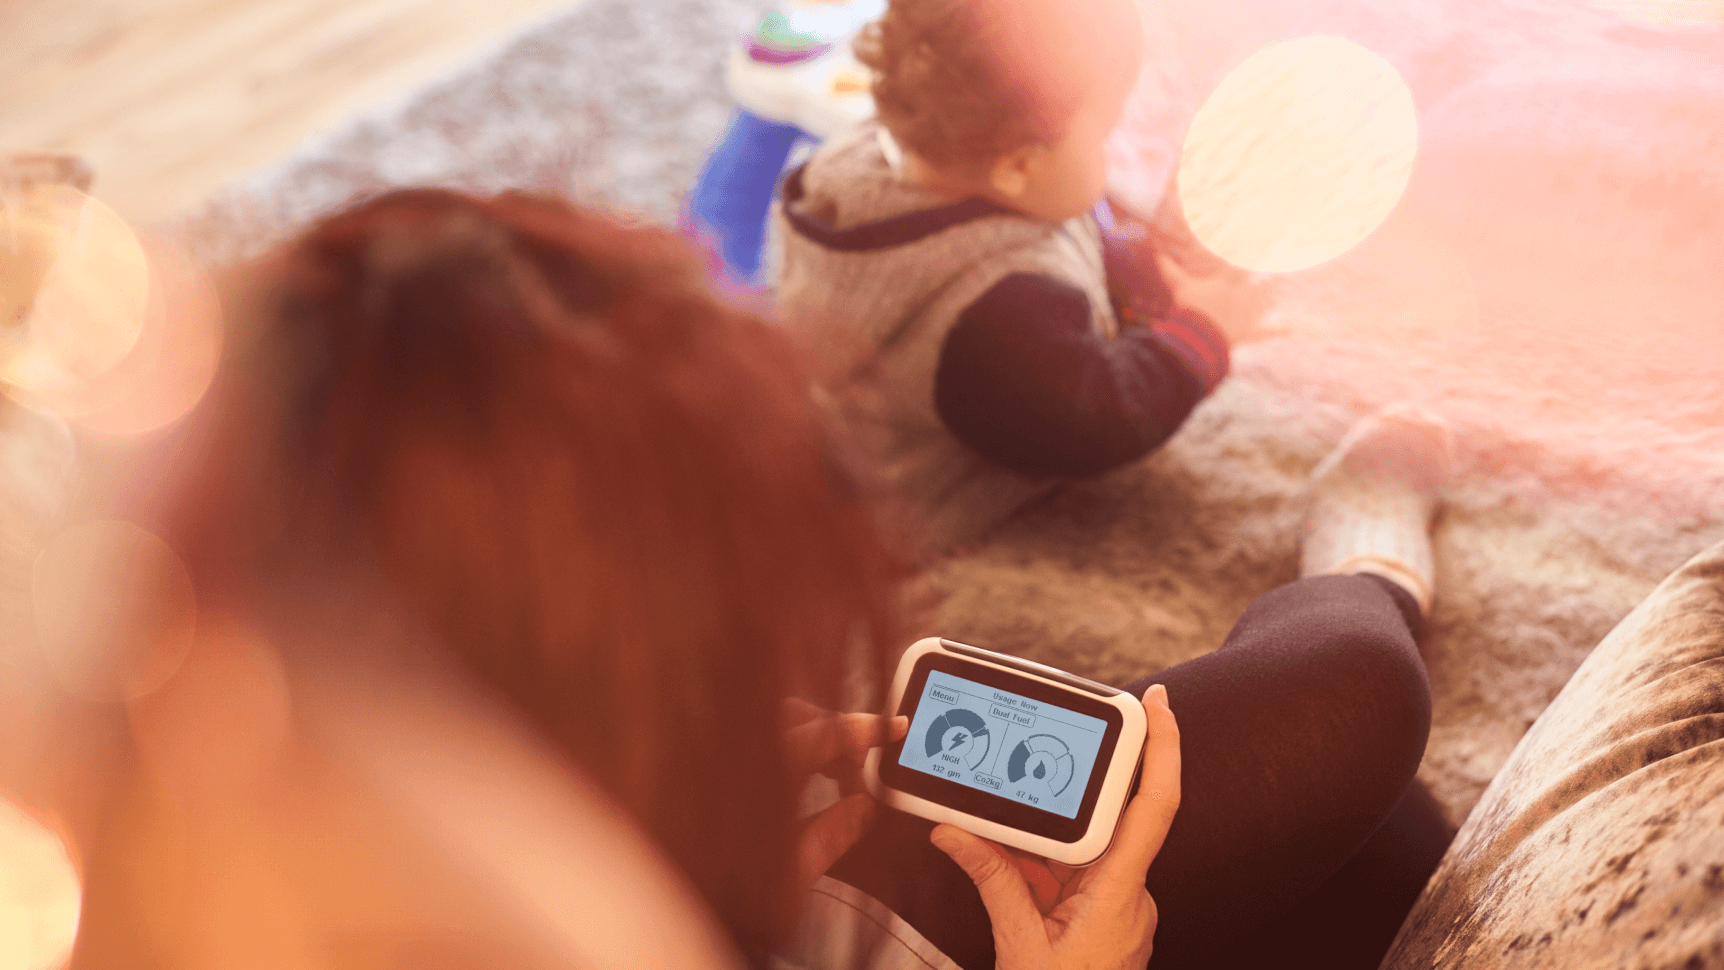 mother caring for child and monitoring smart meter